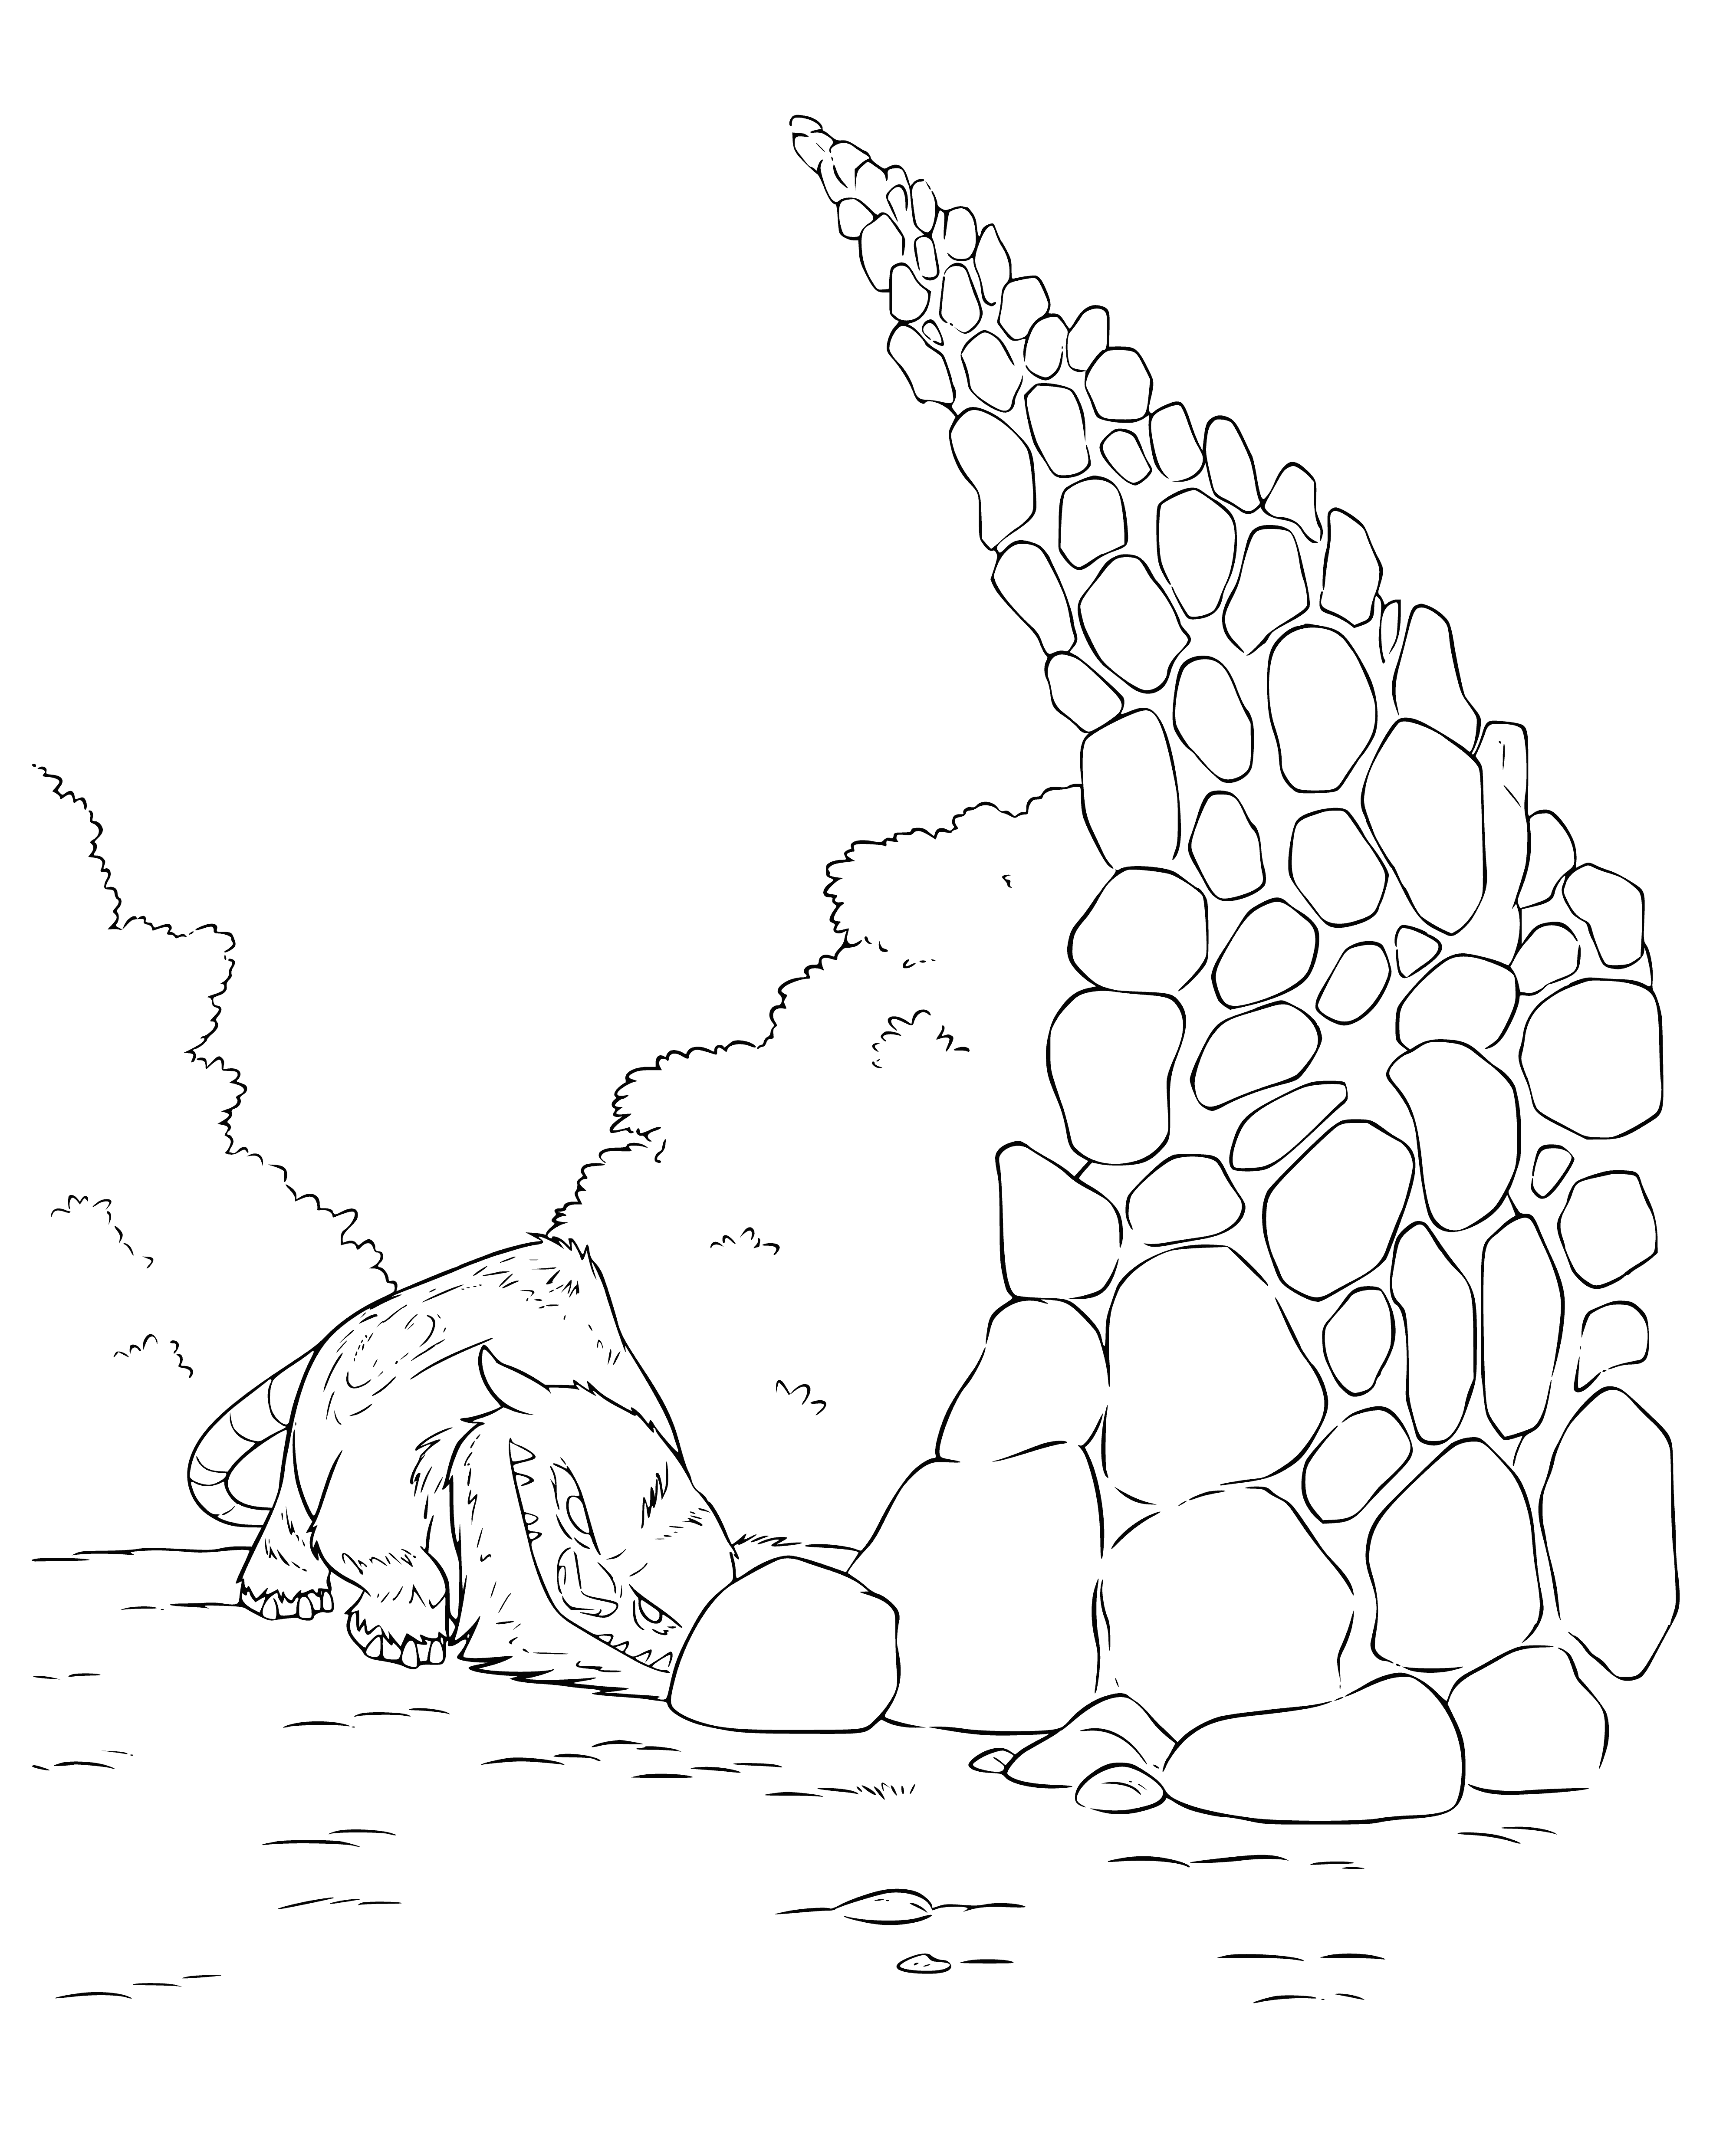 The monster builds towers from stones coloring page